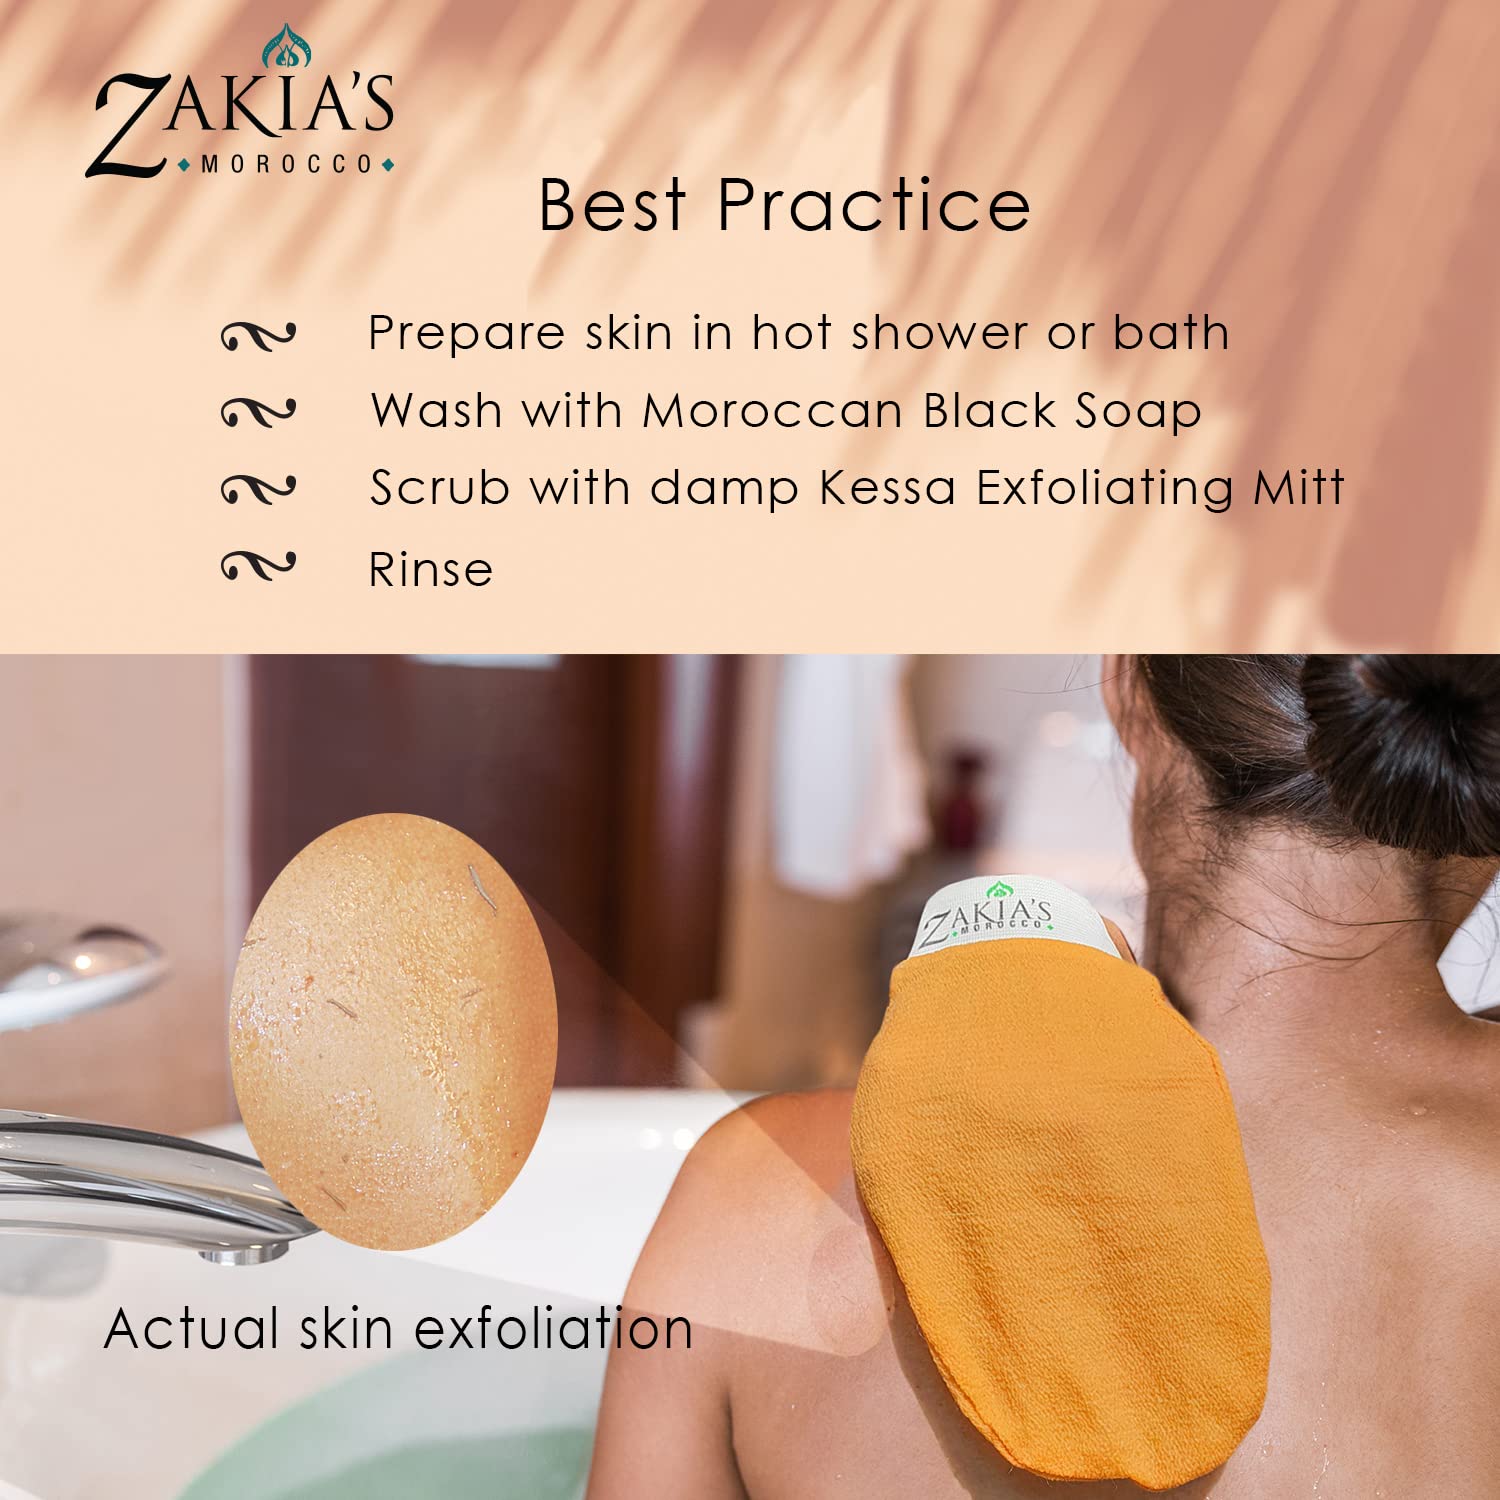 Zakia's Morocco Original Kessa Exfoliating Glove - Salmon Beige - Microdermabrasion At Home Exfoliating Mitts, Removes unwanted dead skin, dirt and grime and Keratosis Pilaris. Great for spray tan removal and preparation. Made of 100% natural Rayon. (1 Un